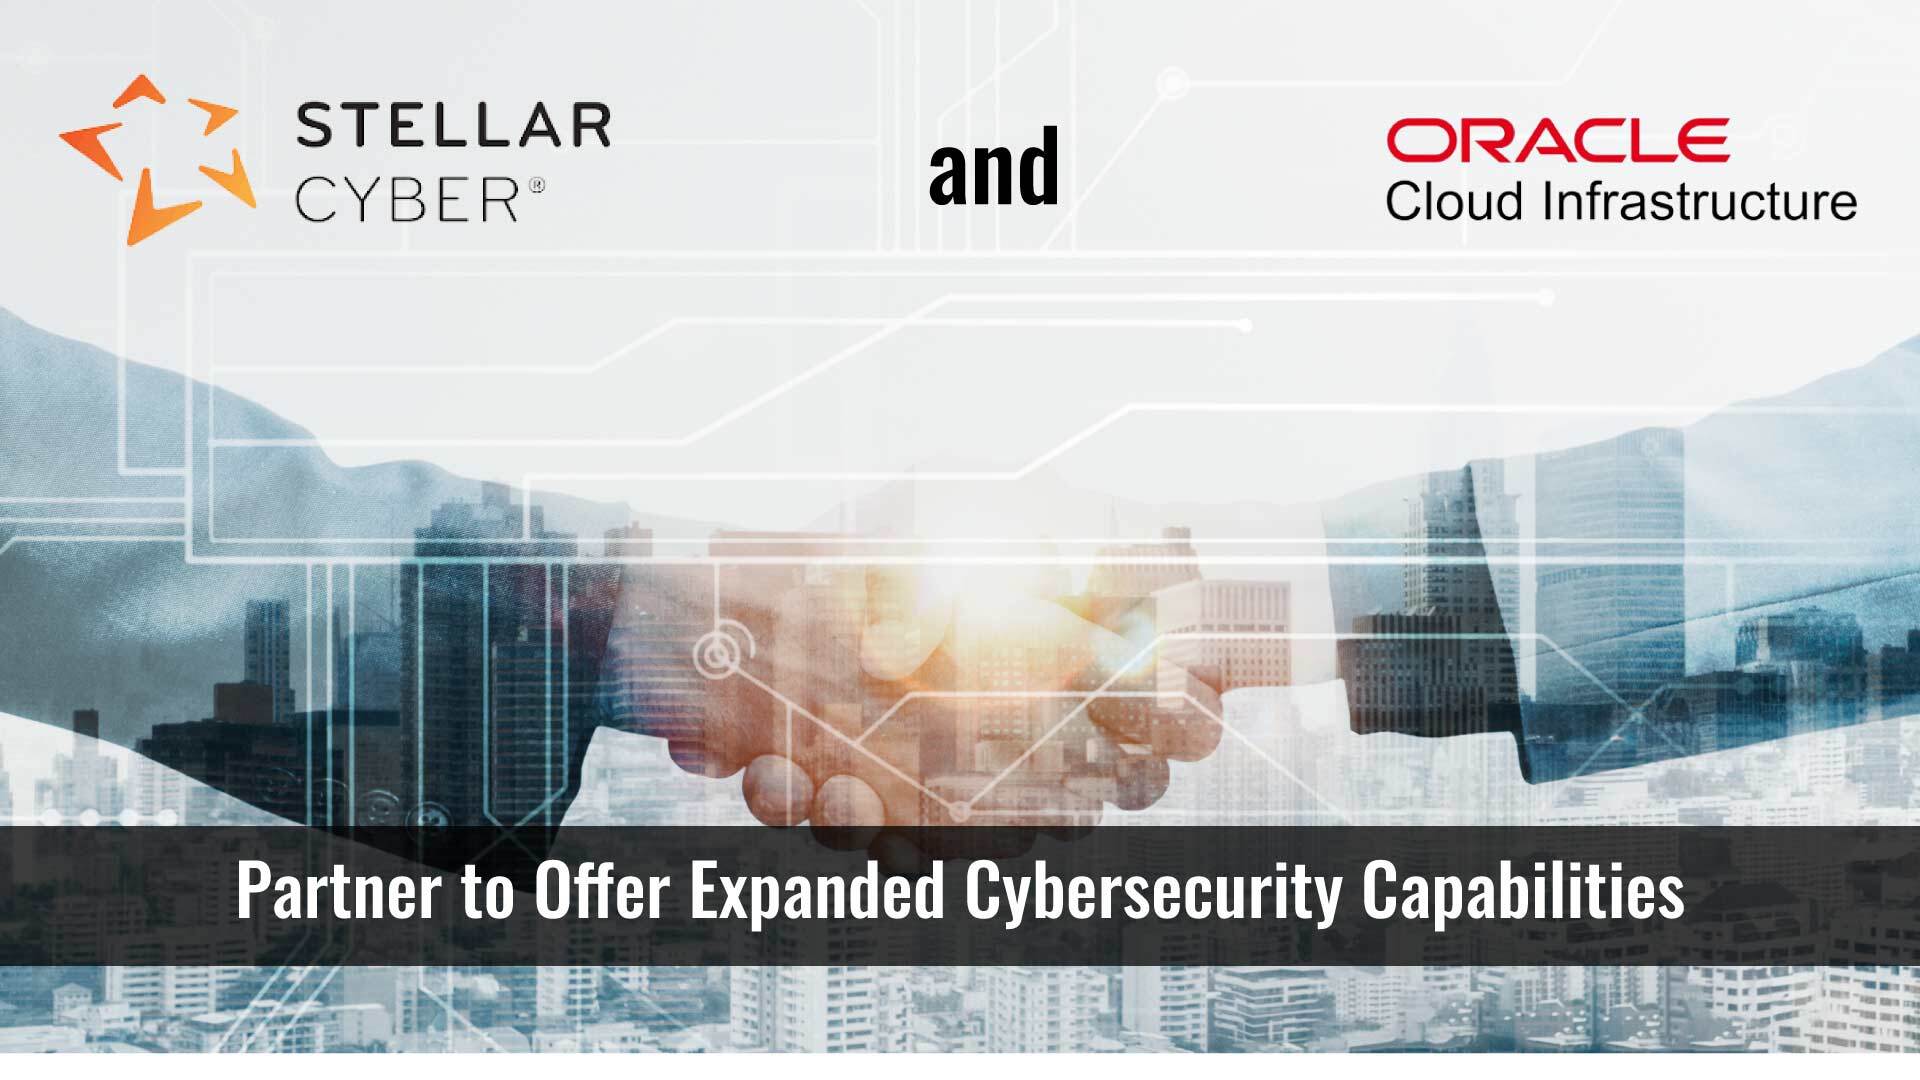 Stellar Cyber and Oracle Cloud Infrastructure Partner to Offer Expanded Cybersecurity Capabilities